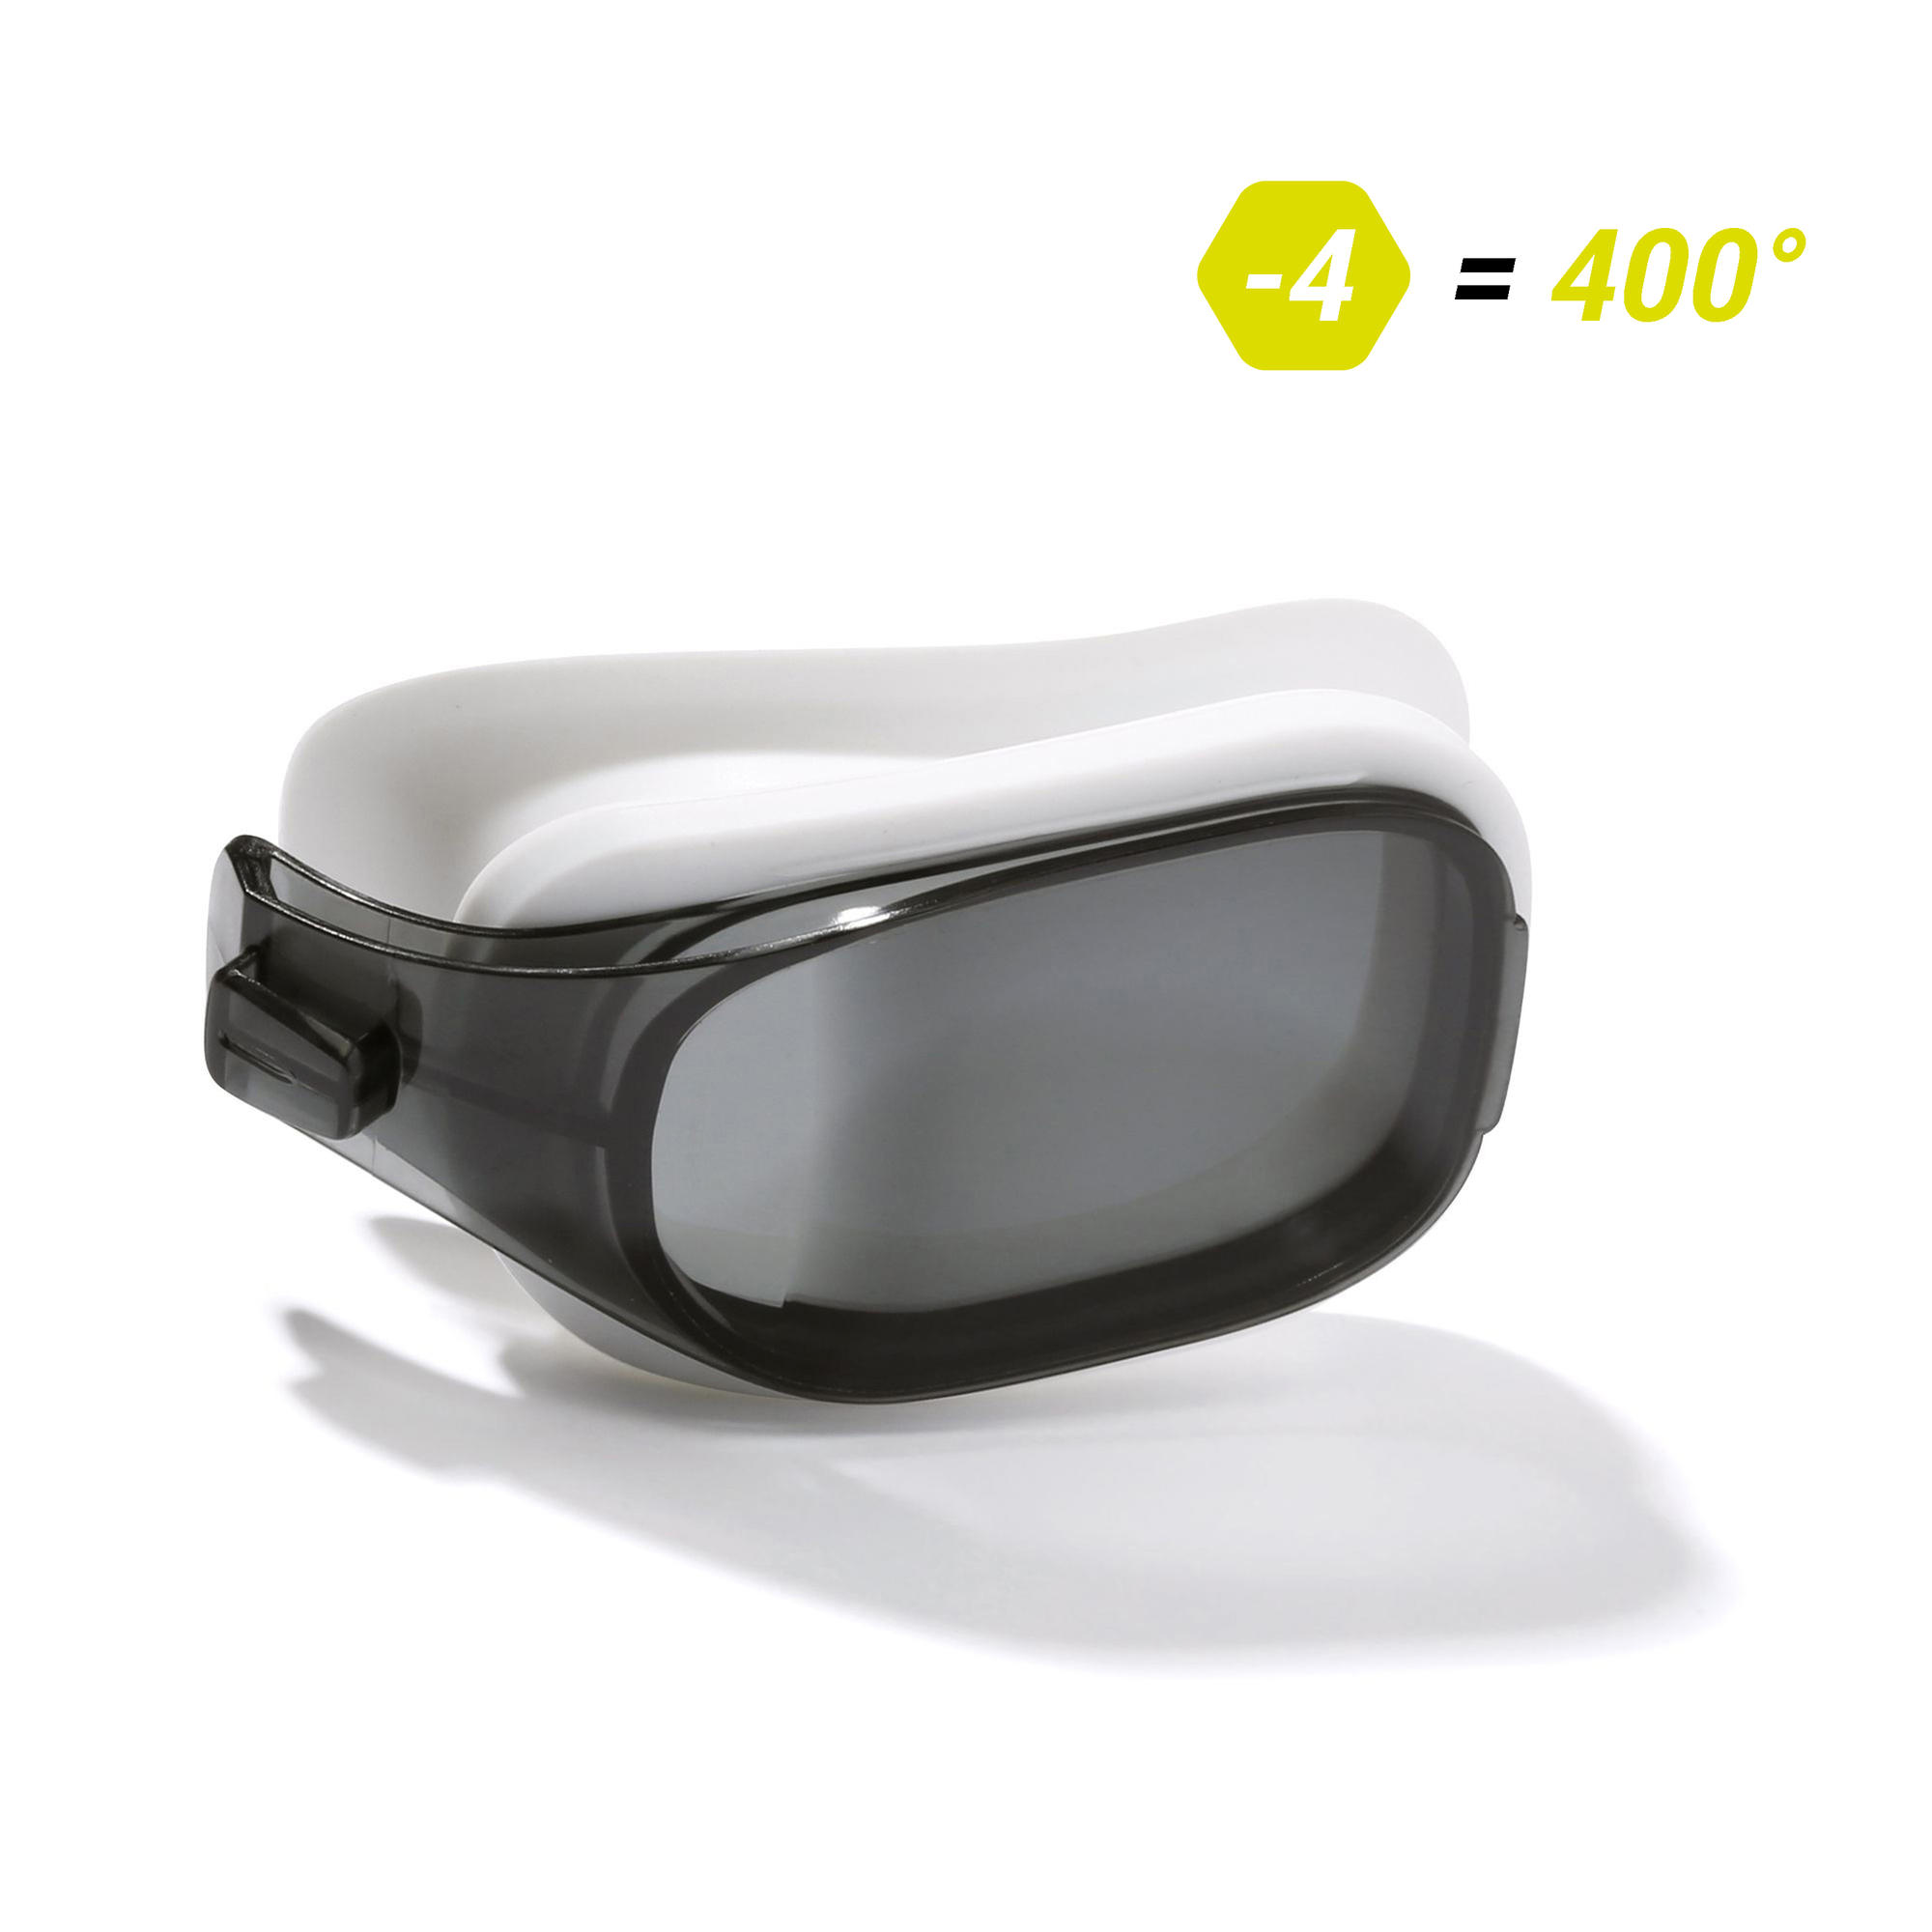 LENS -4 FOR SWIMMING GOGGLES 500 SELFIT 